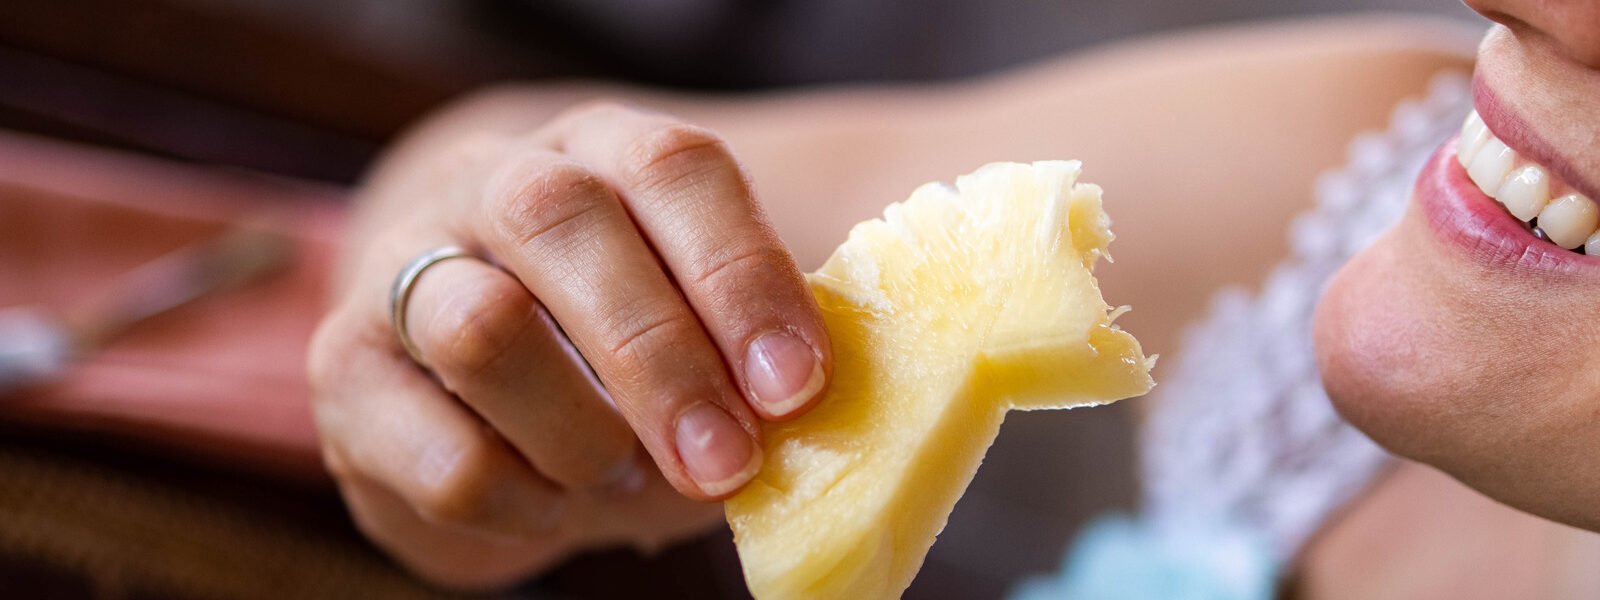 Eating Pineapple Has An Unexpected Effect On Your Cholesterol - Health Digest